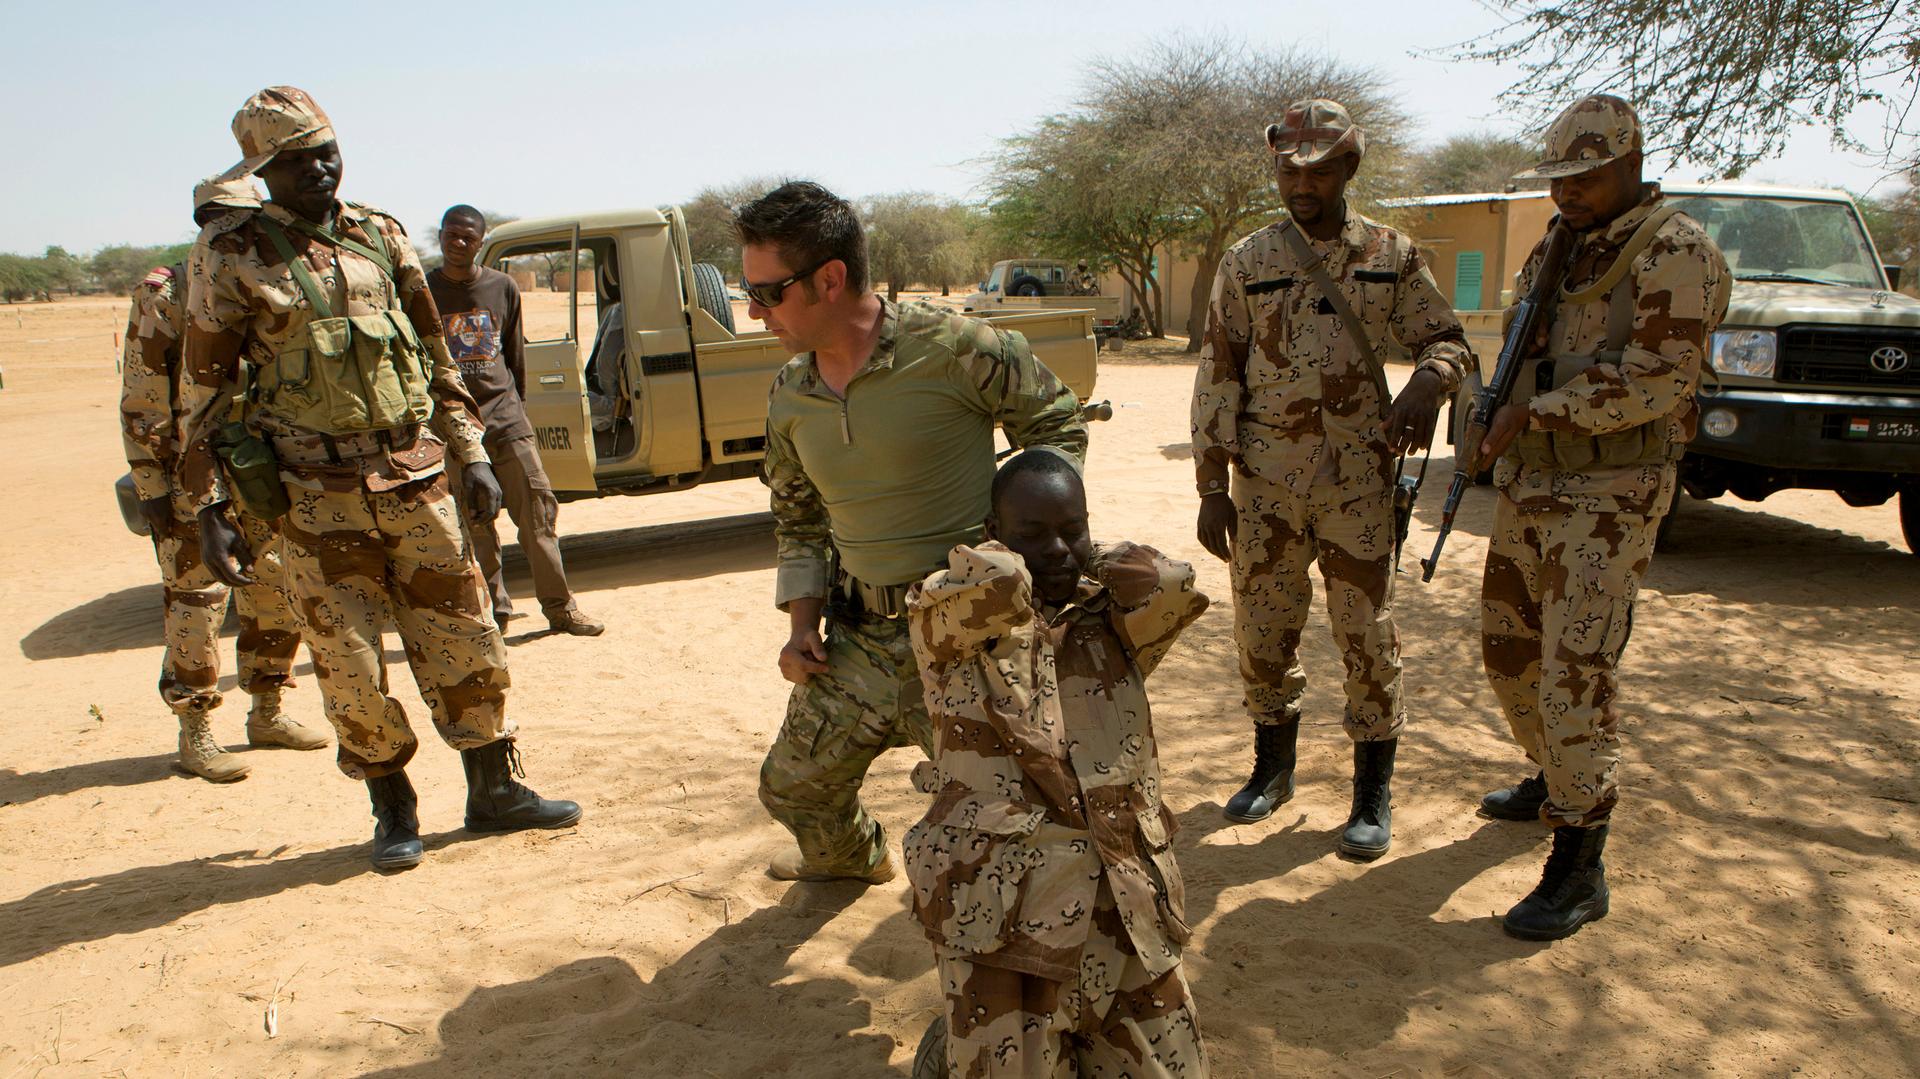 A US special forces soldier demonstrates how to detain a suspect during Flintlock 2014, a US-led international training mission for African militaries, in Diffa, Niger, March 4, 2014.